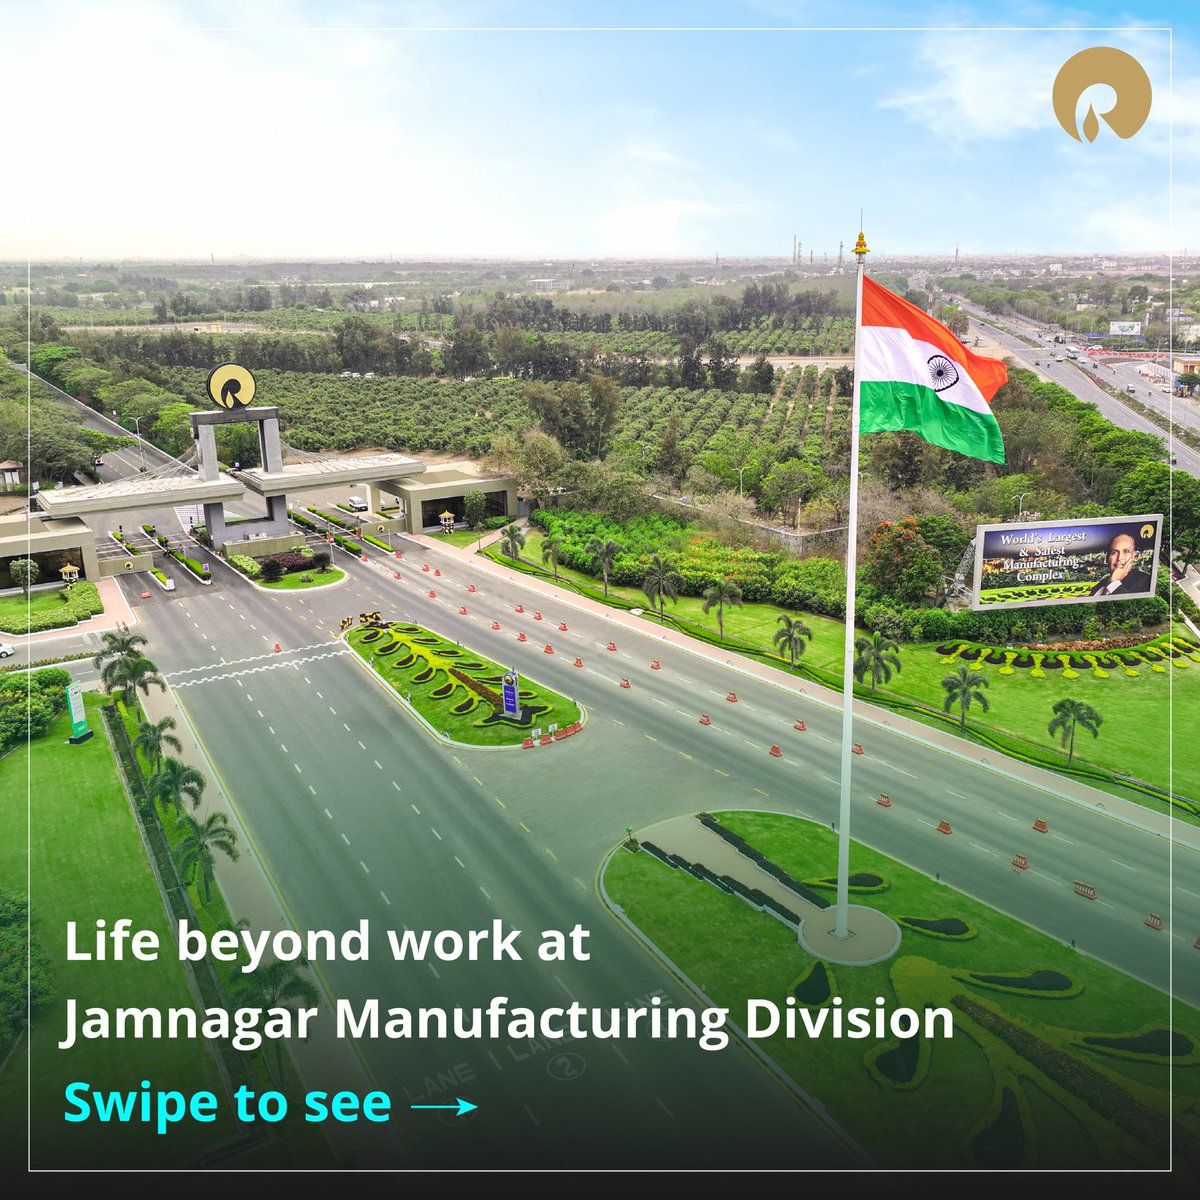 At the world's largest refinery complex in Jamnagar, life is never dull. Spot us refining our moves to the beats of Zumba, finding Zen in Yoga, scoring goals in football, or enjoying our lush campus!

#WorldOfReliance #Reliance #Jamnagar #JMD #RILWayofLife #RPeople #OneTeam